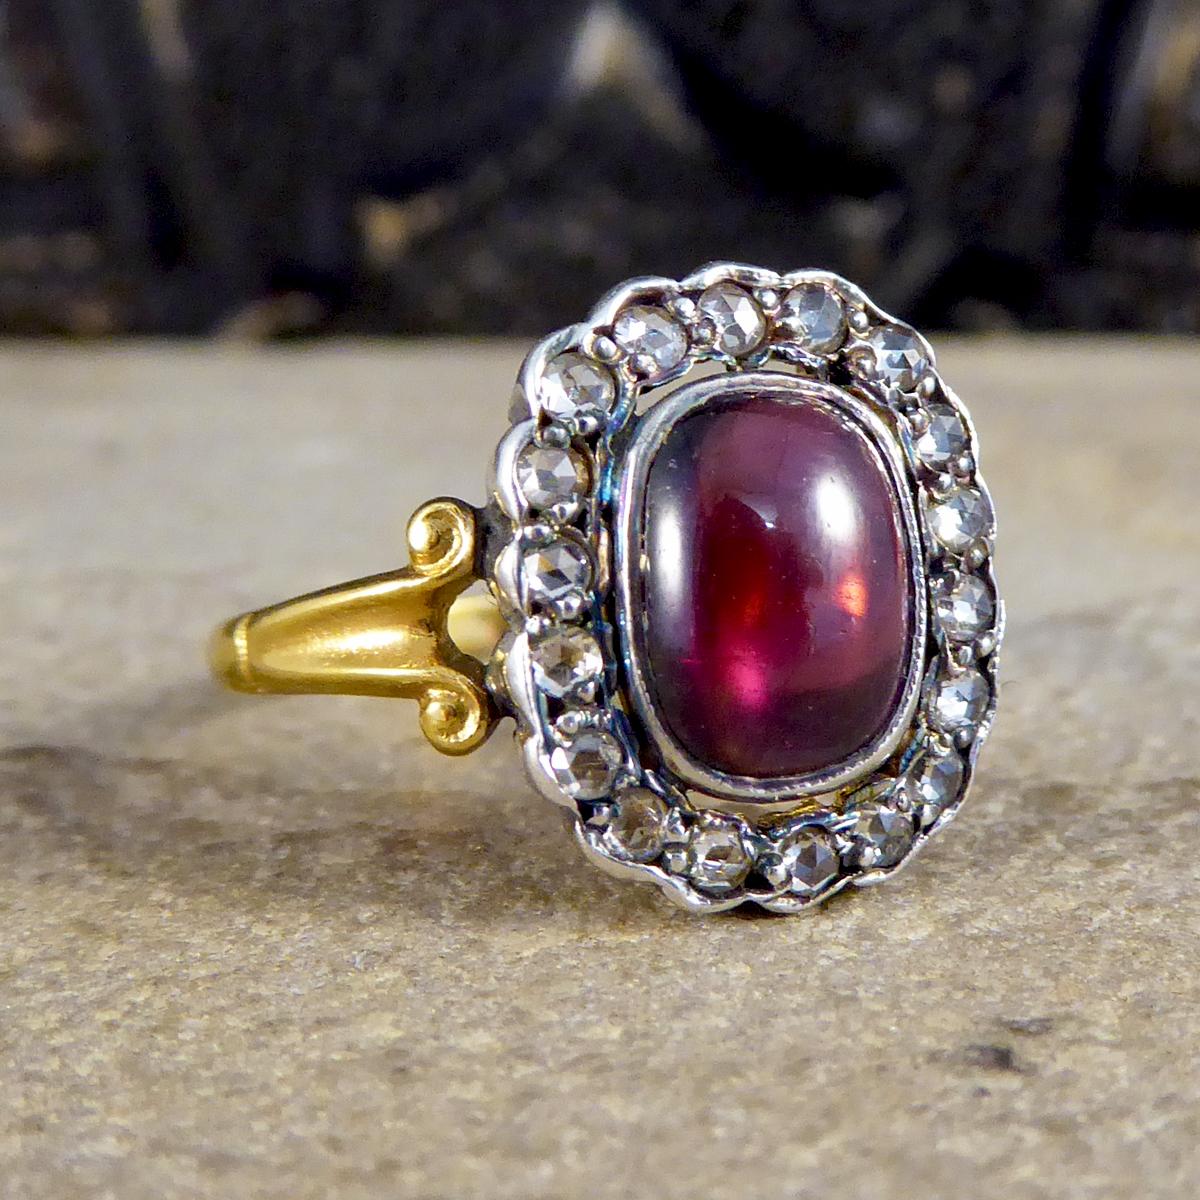 This beautiful contemporary ring has been crafted to resemble an antique style, it has an 18ct Yellow Gold band with scroll details on the shoulder leading to an 18ct White Gold setting holding a Cabochon Garnet stone in a rub over collar setting